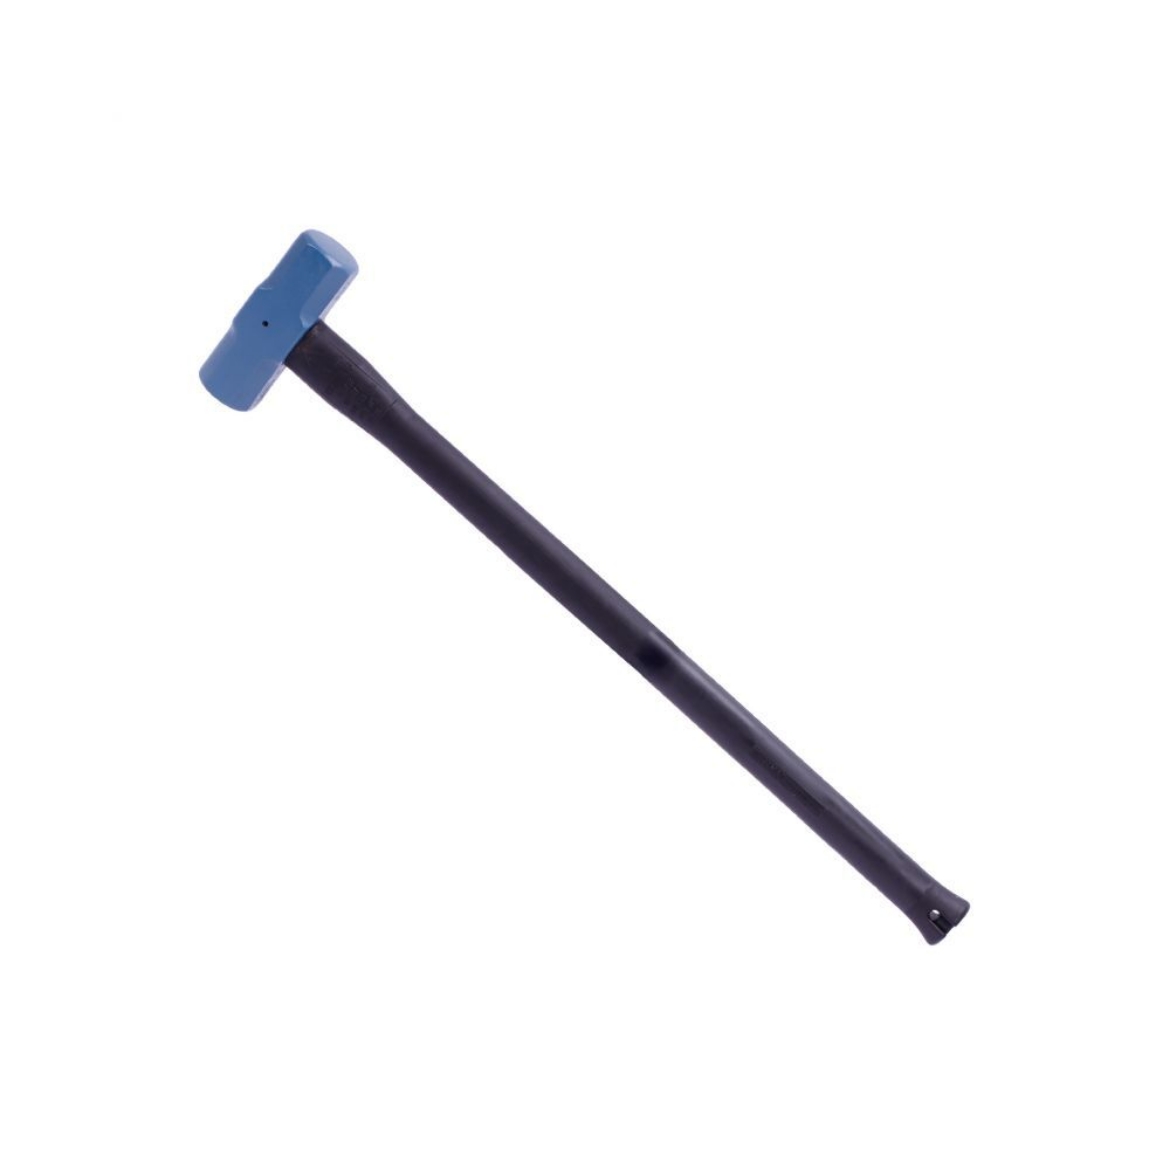 Picture of Sledge Hammer 7lb/3.1kg Normalised (soft face), Pinned Steel Core Fibreglass Handle 800mm